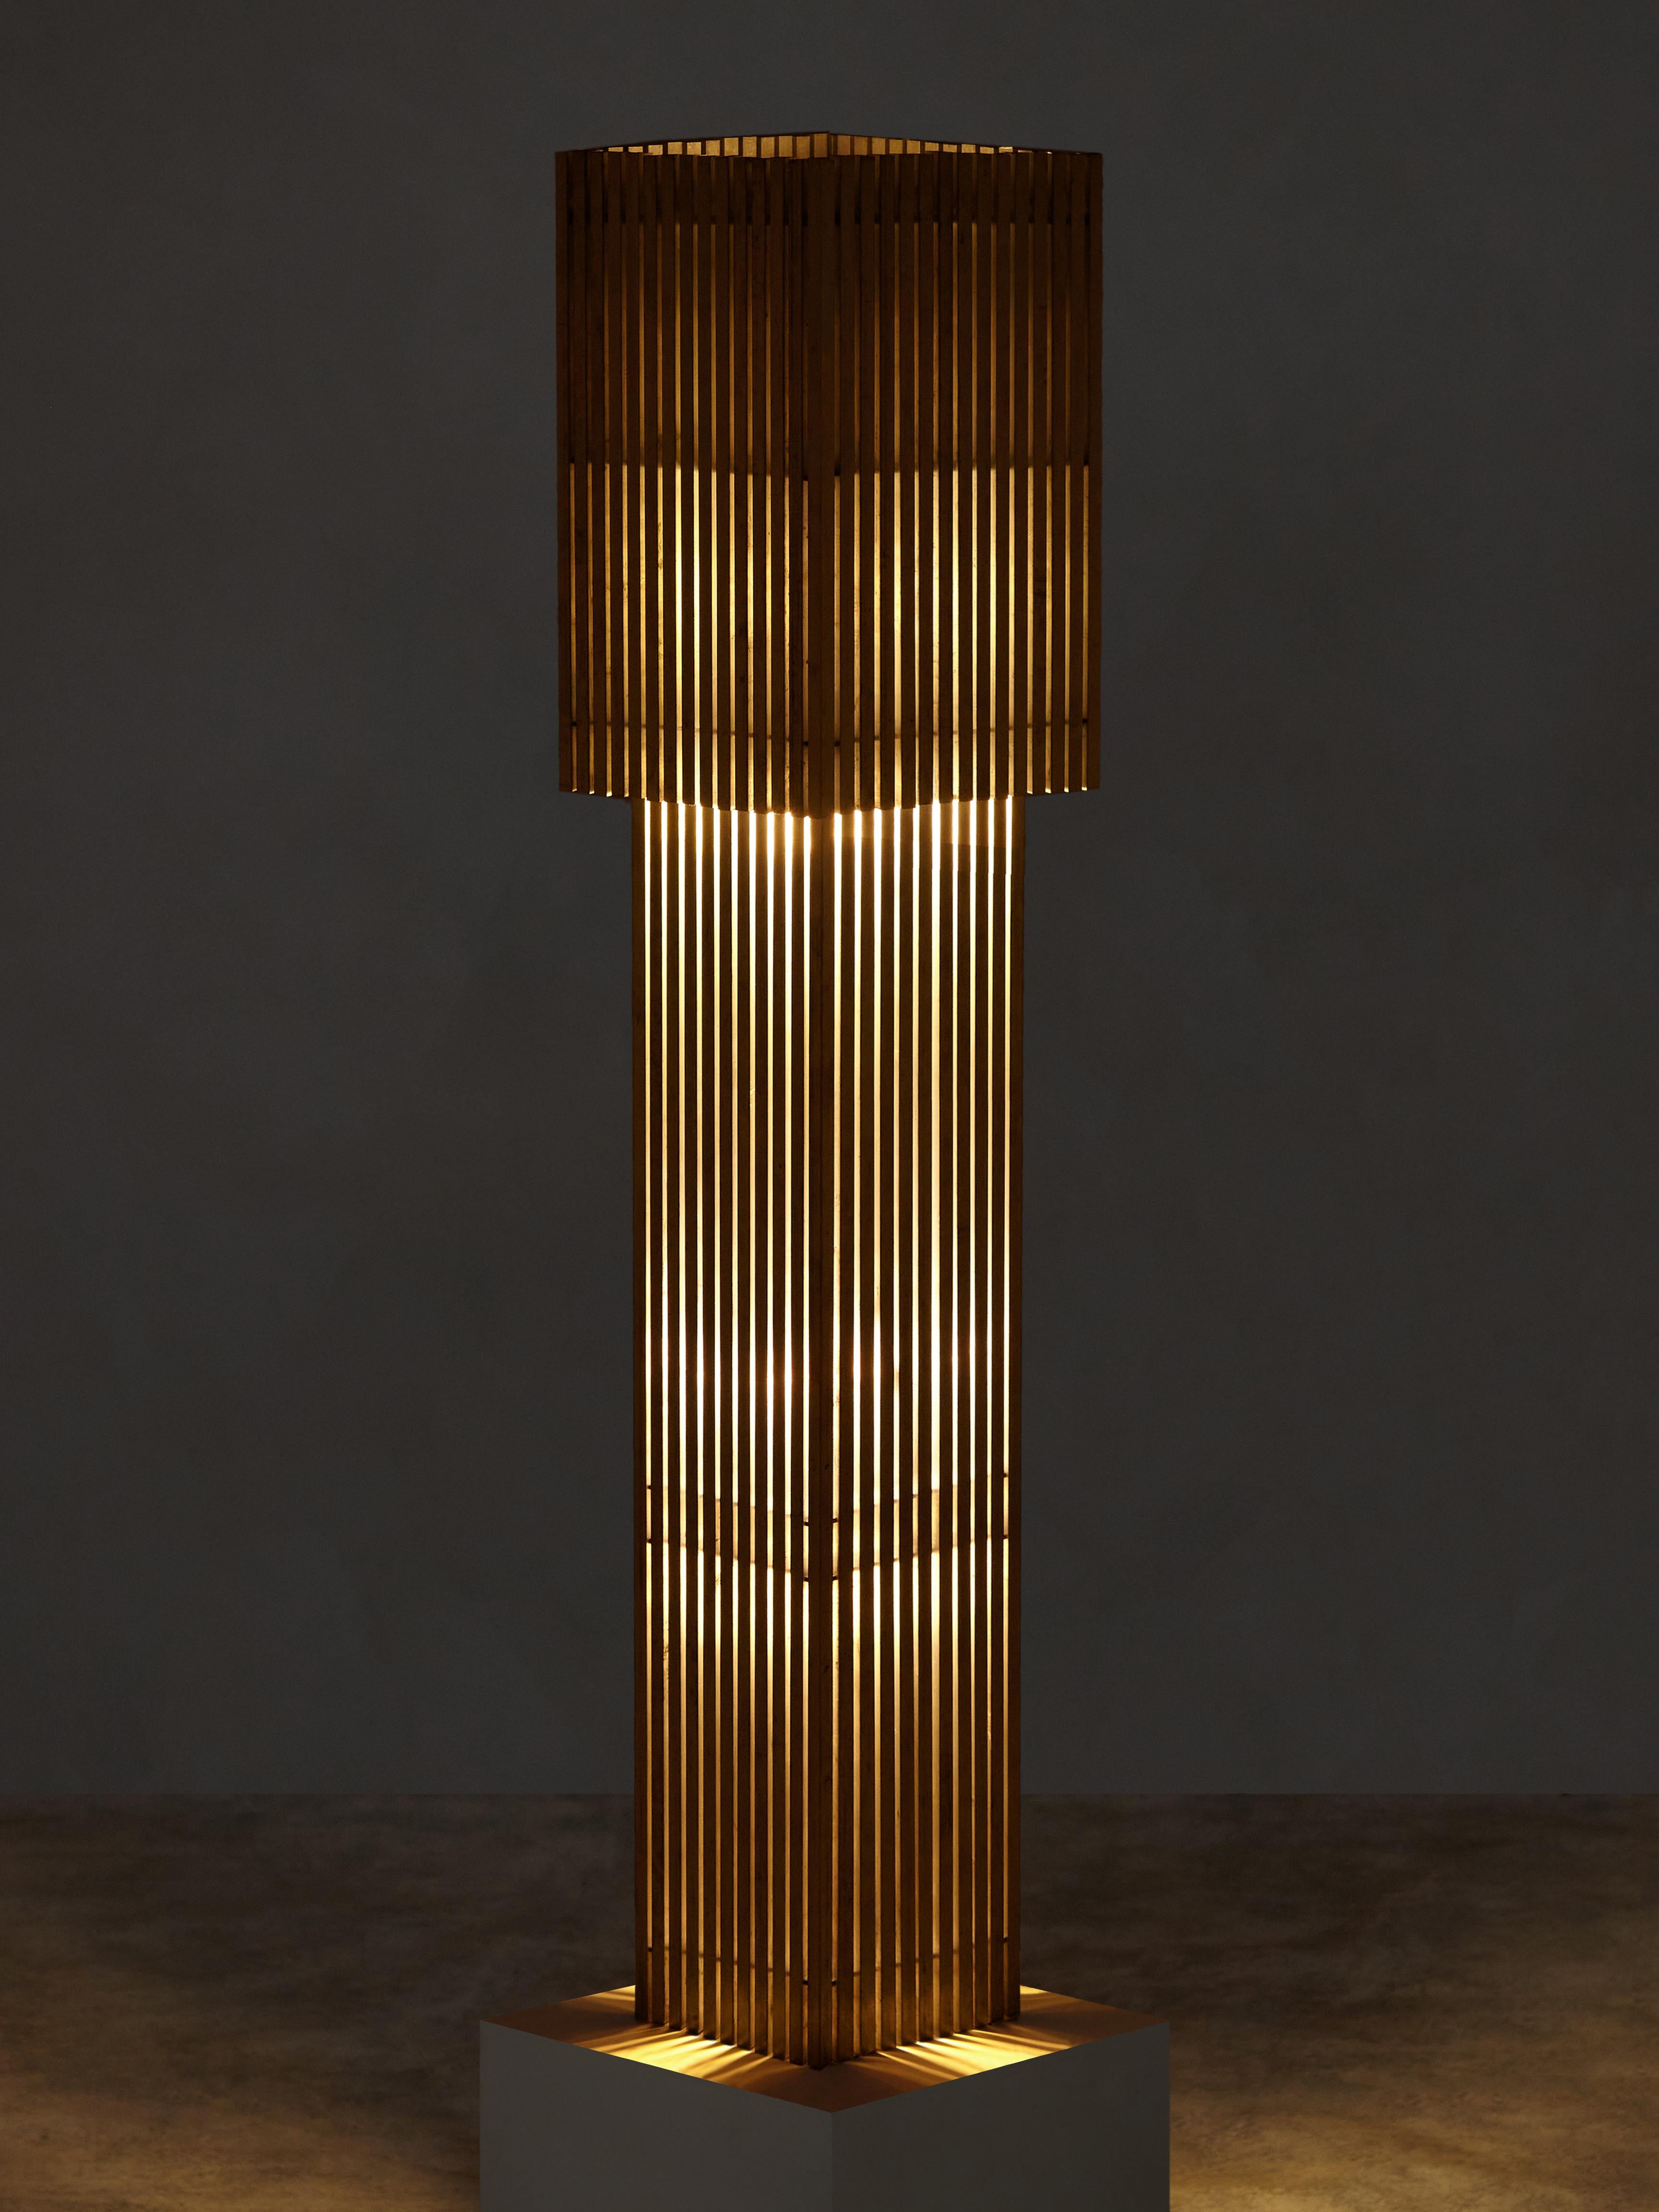 Hand-brushed metal dowels both block and direct the lamp’s concealed LED bulb, casting an uneven glow through the vertical strips of the lamp’s body. The removable top-shade functions as a manual dimmer, allowing the lamp to transform in shape and